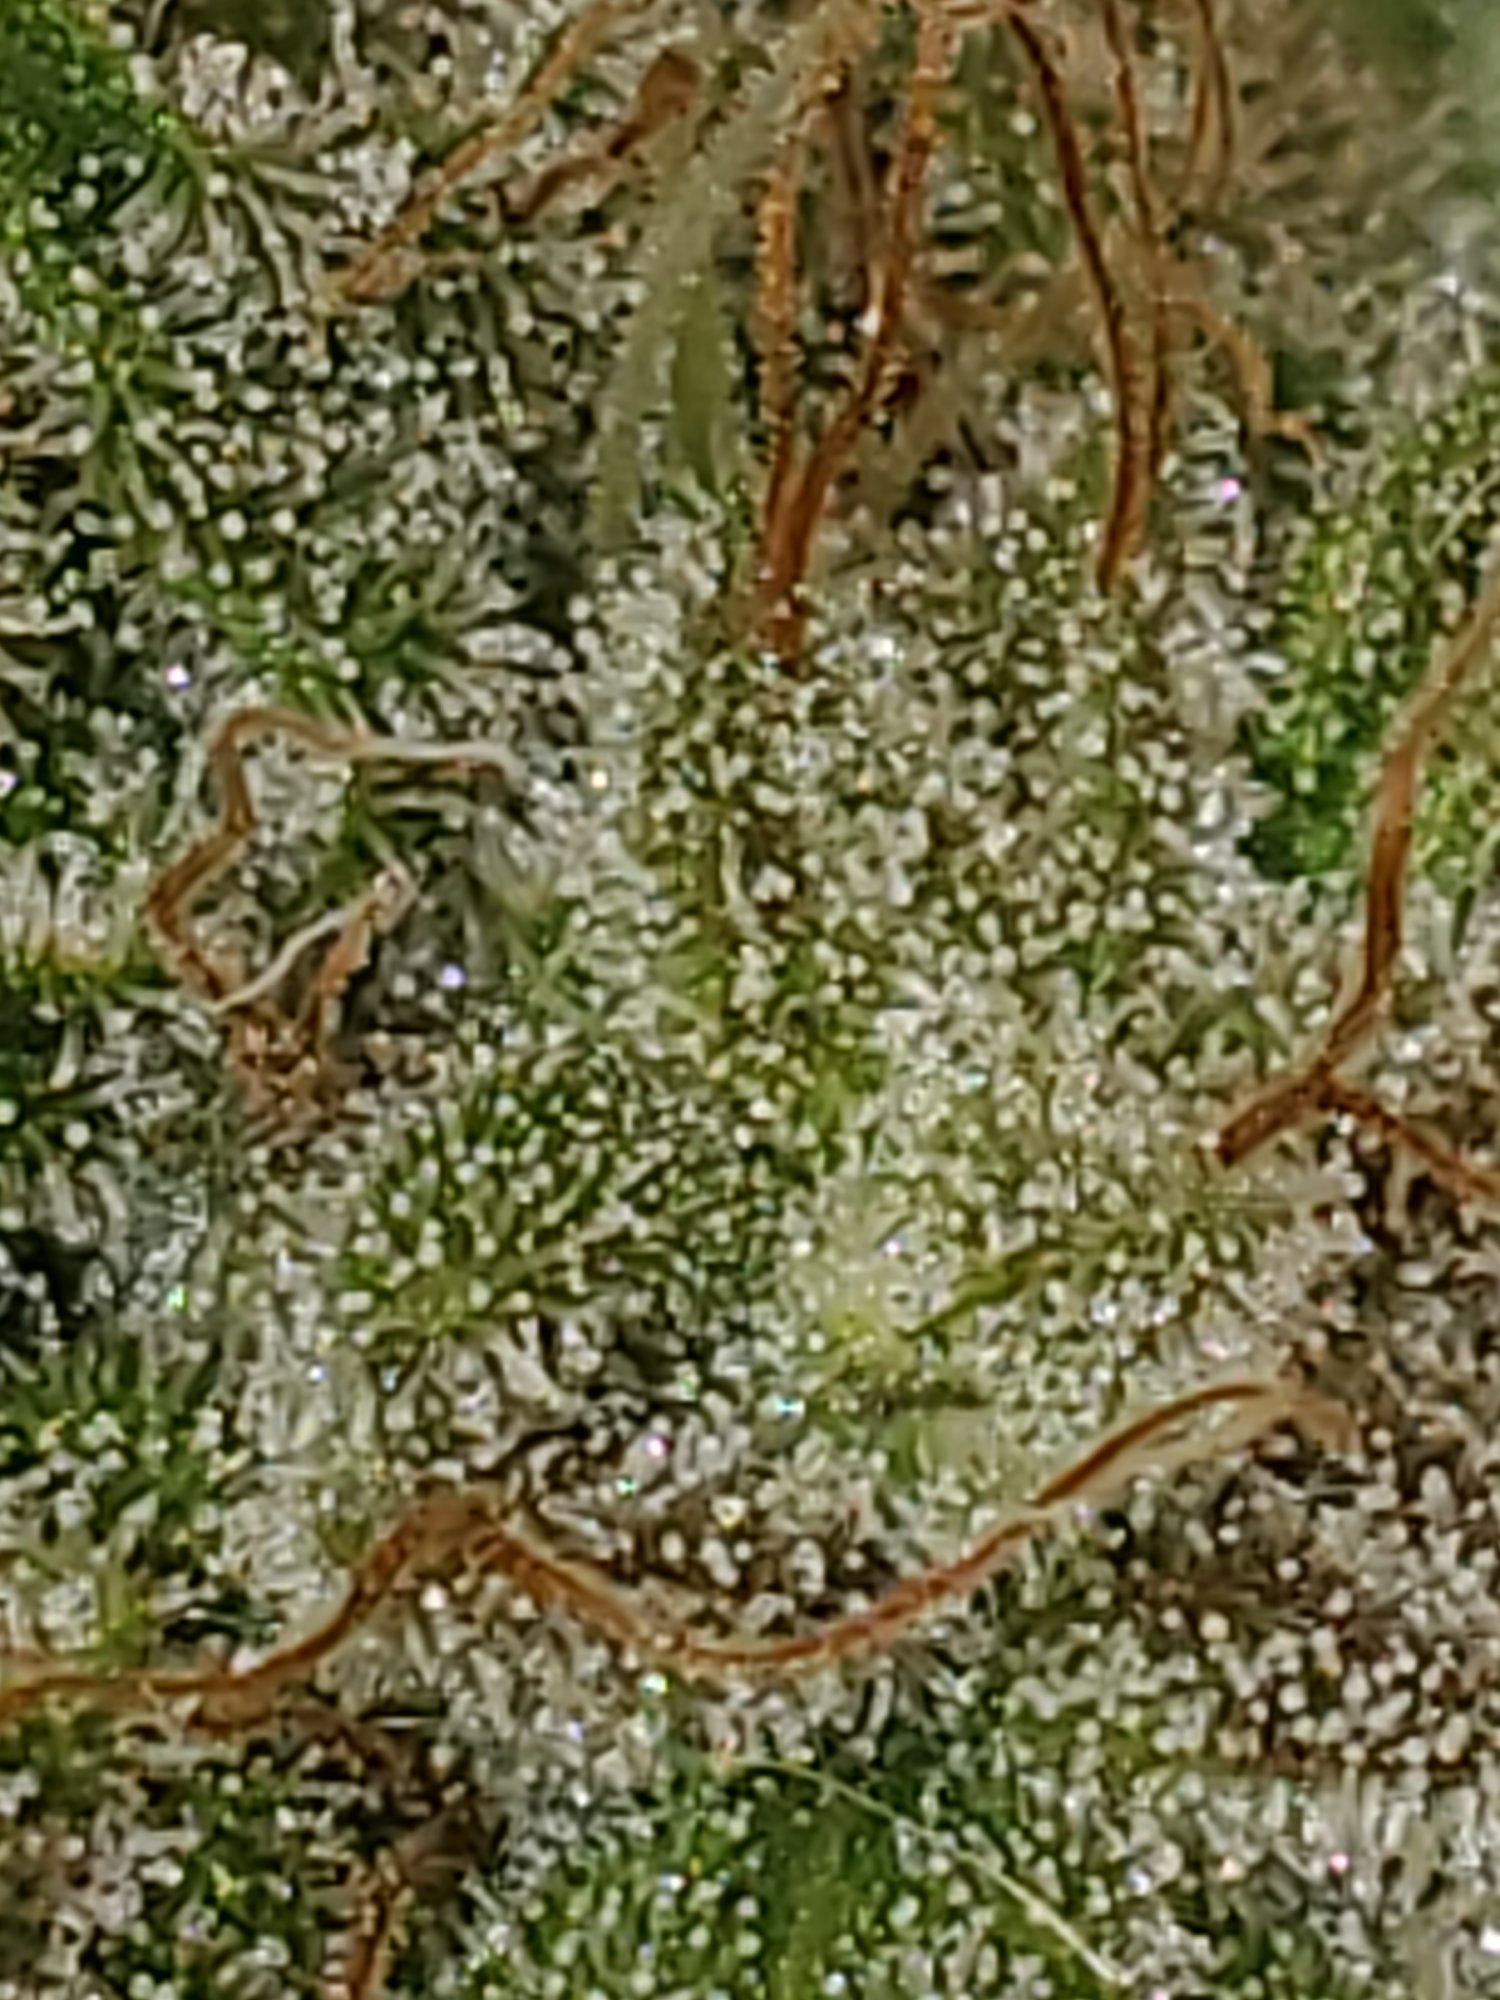 Trichomes are these cloudy or clear 5